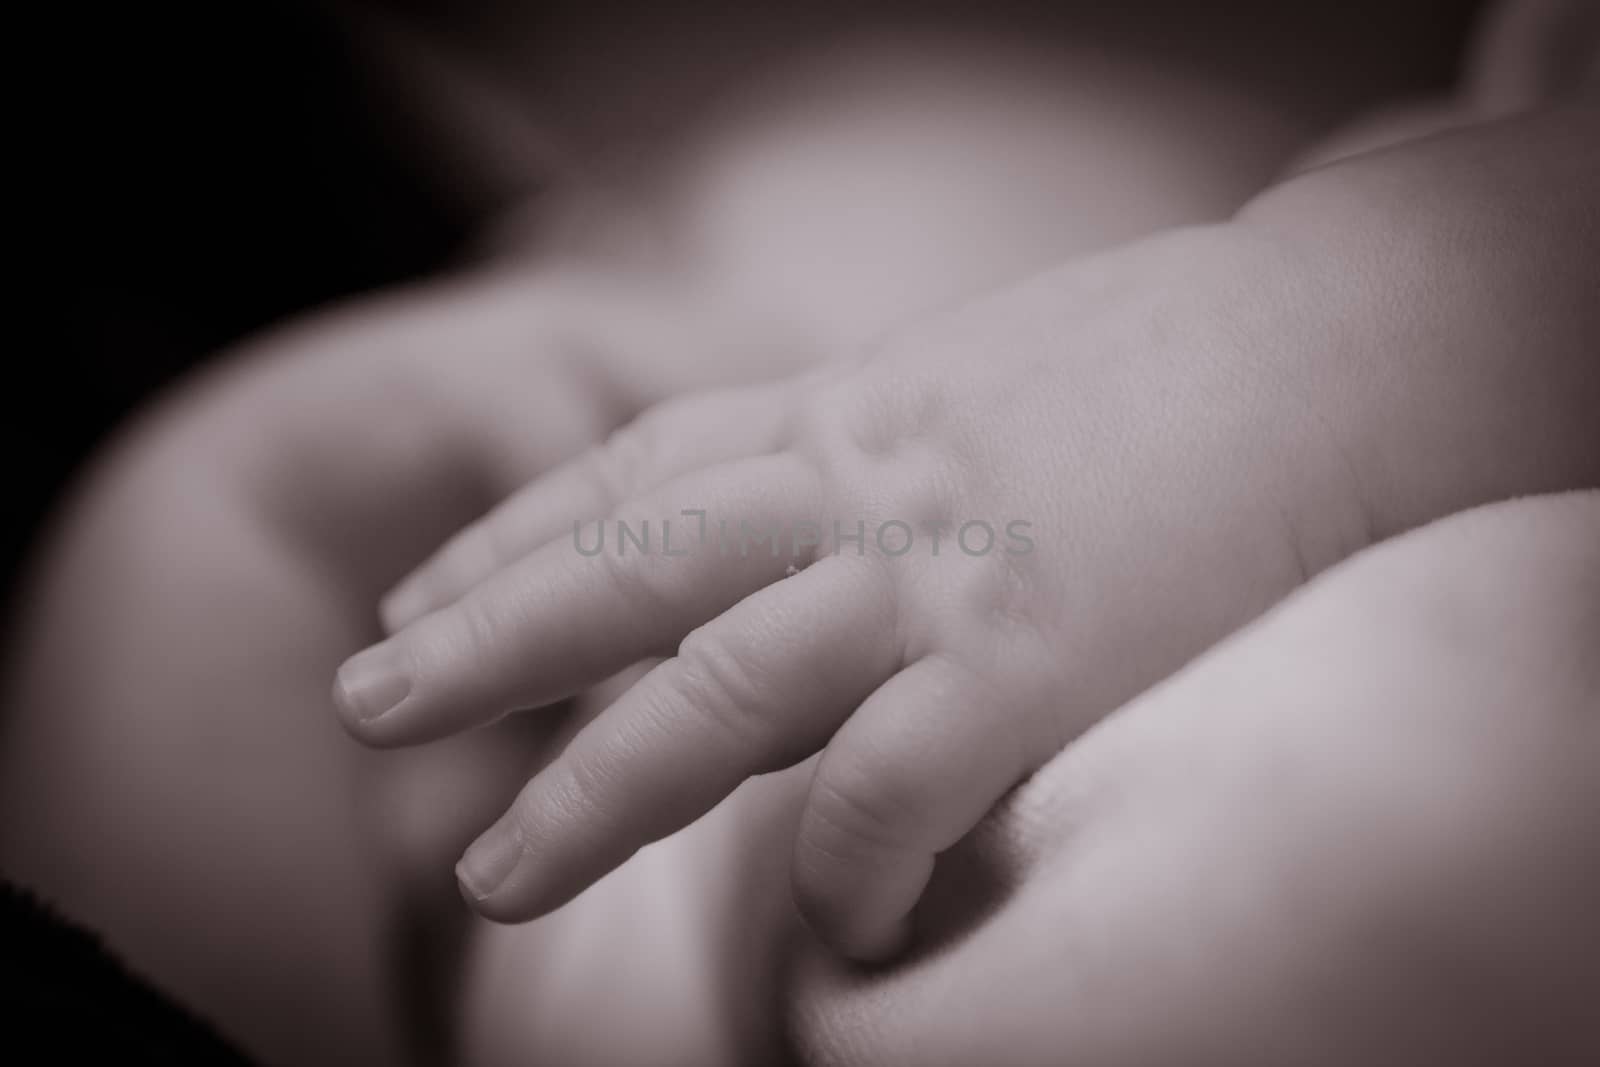 monochrome close up of a baby hands